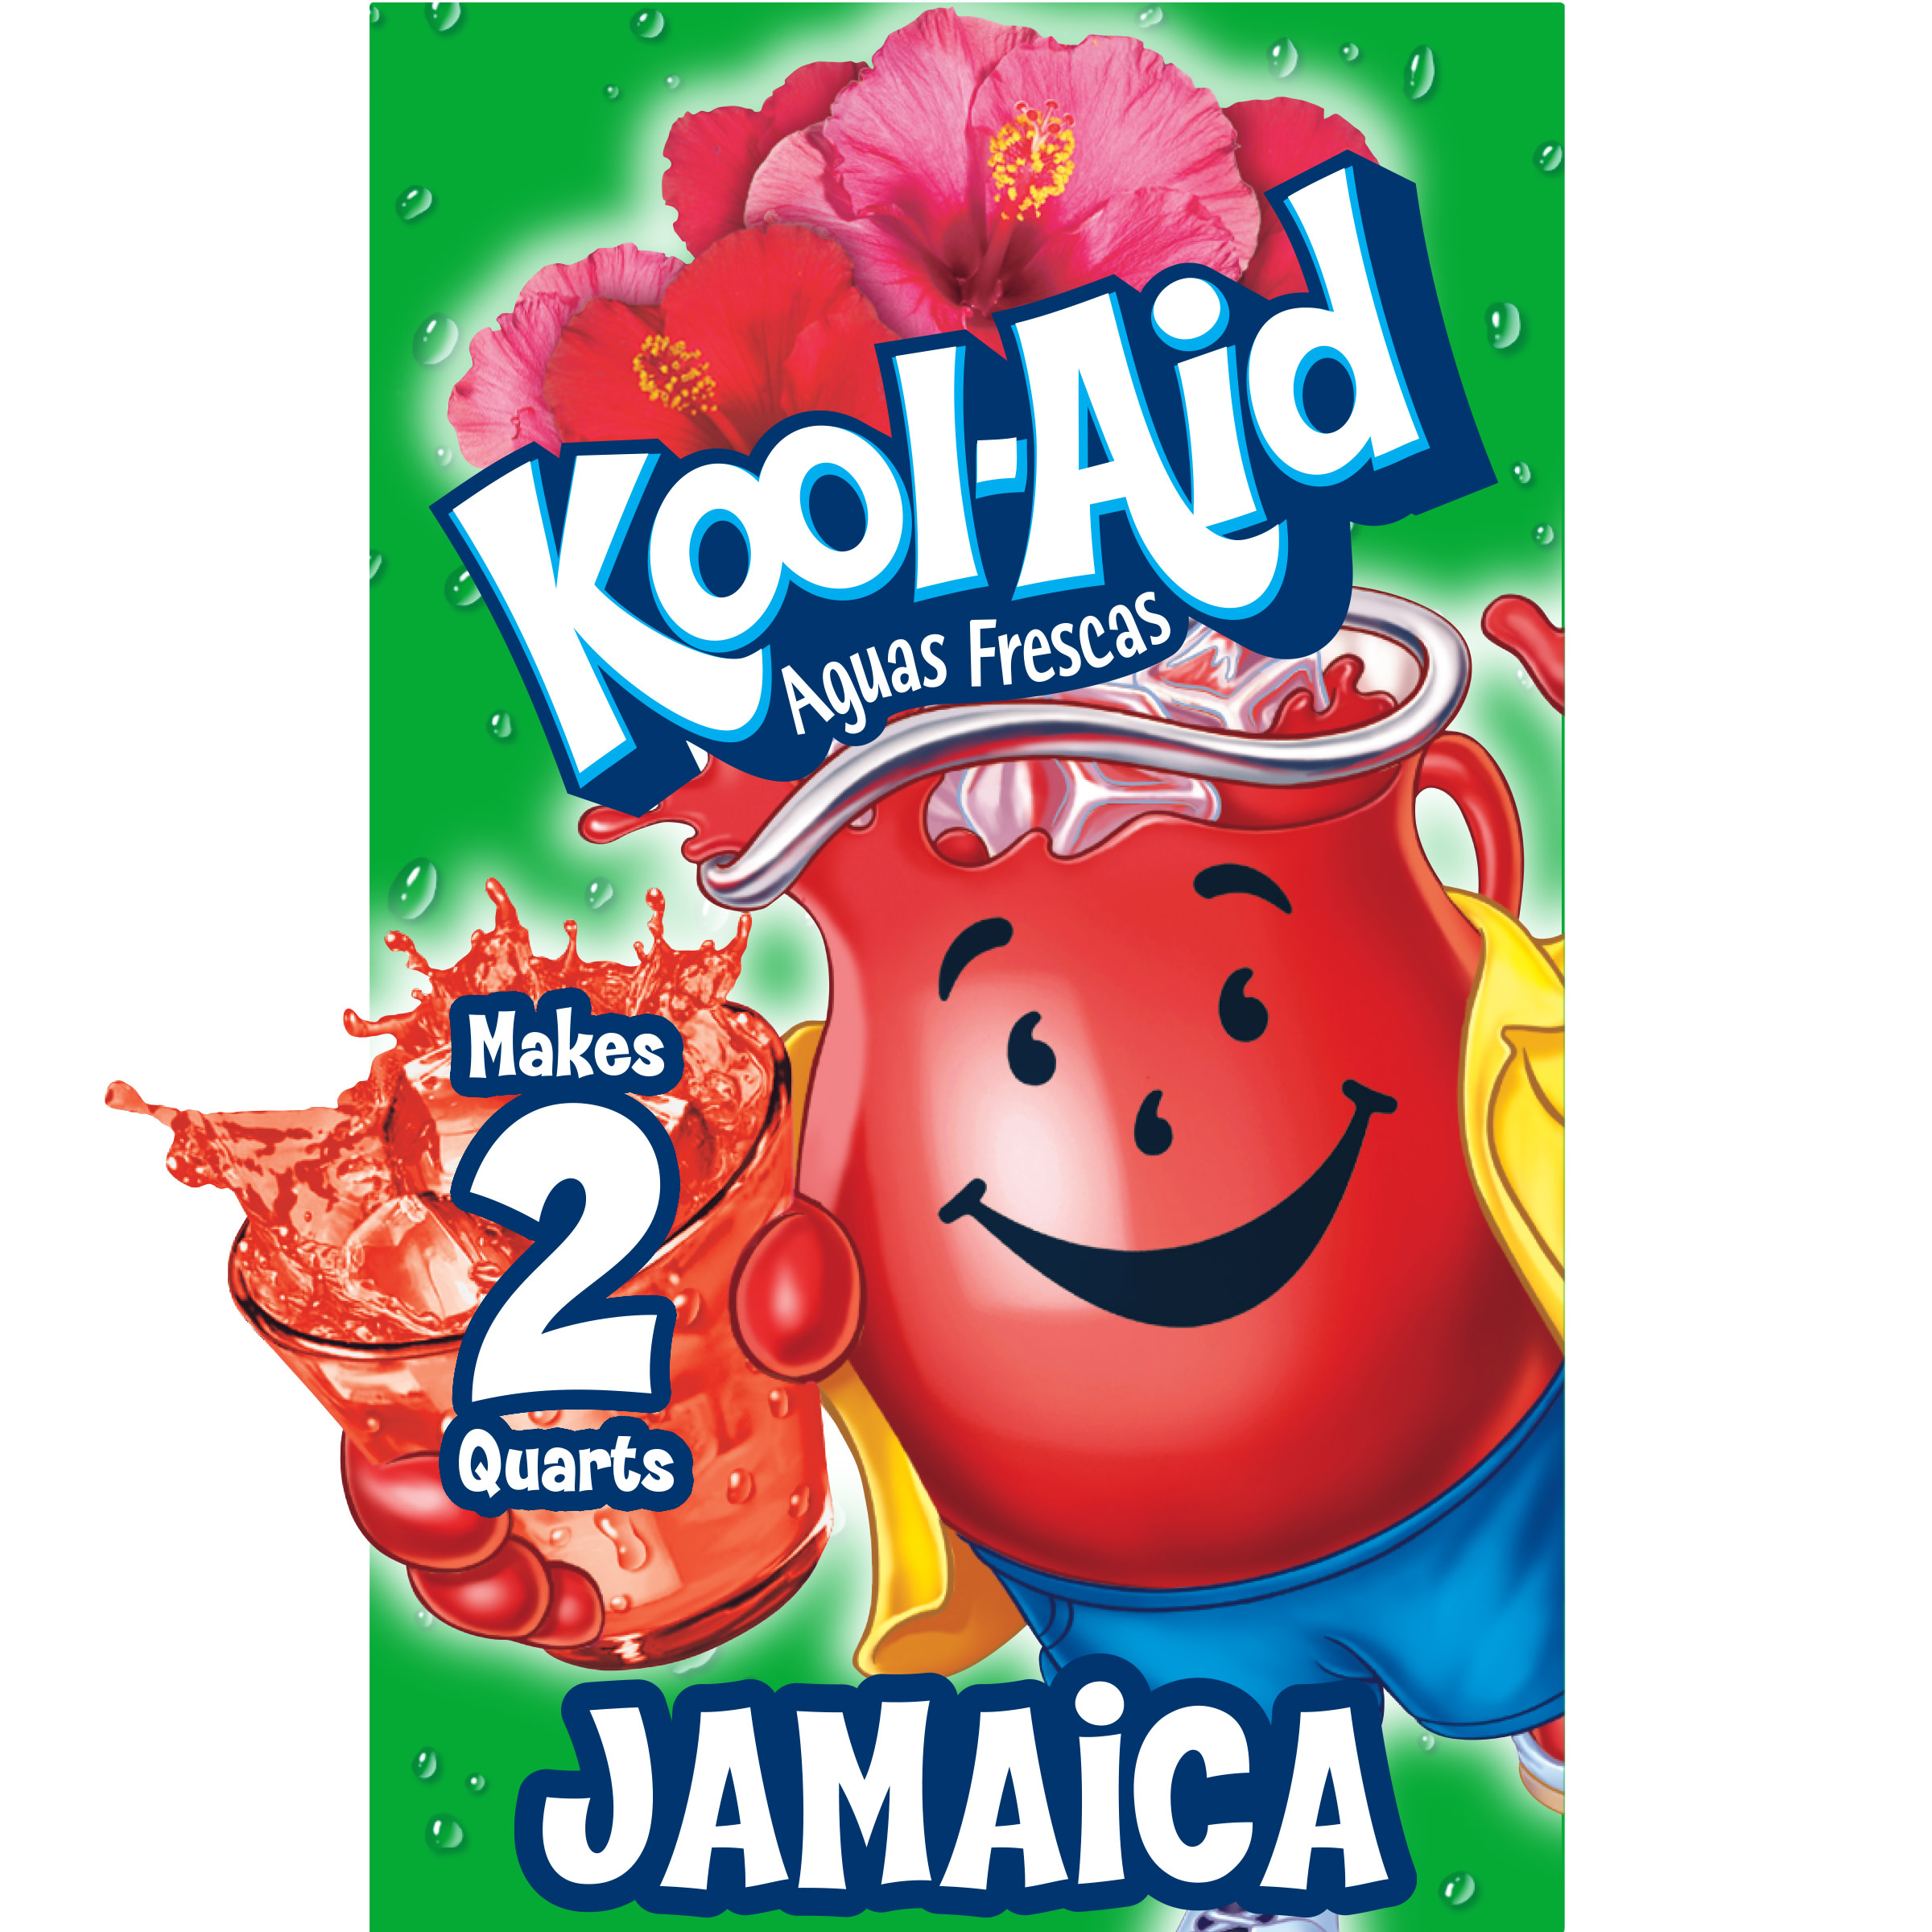 Kool-Aid Aguas Frescas Unsweetened Jamaica Artifically Flavored Powdered Soft Drink Mix, 0.14 oz Packet - image 1 of 8